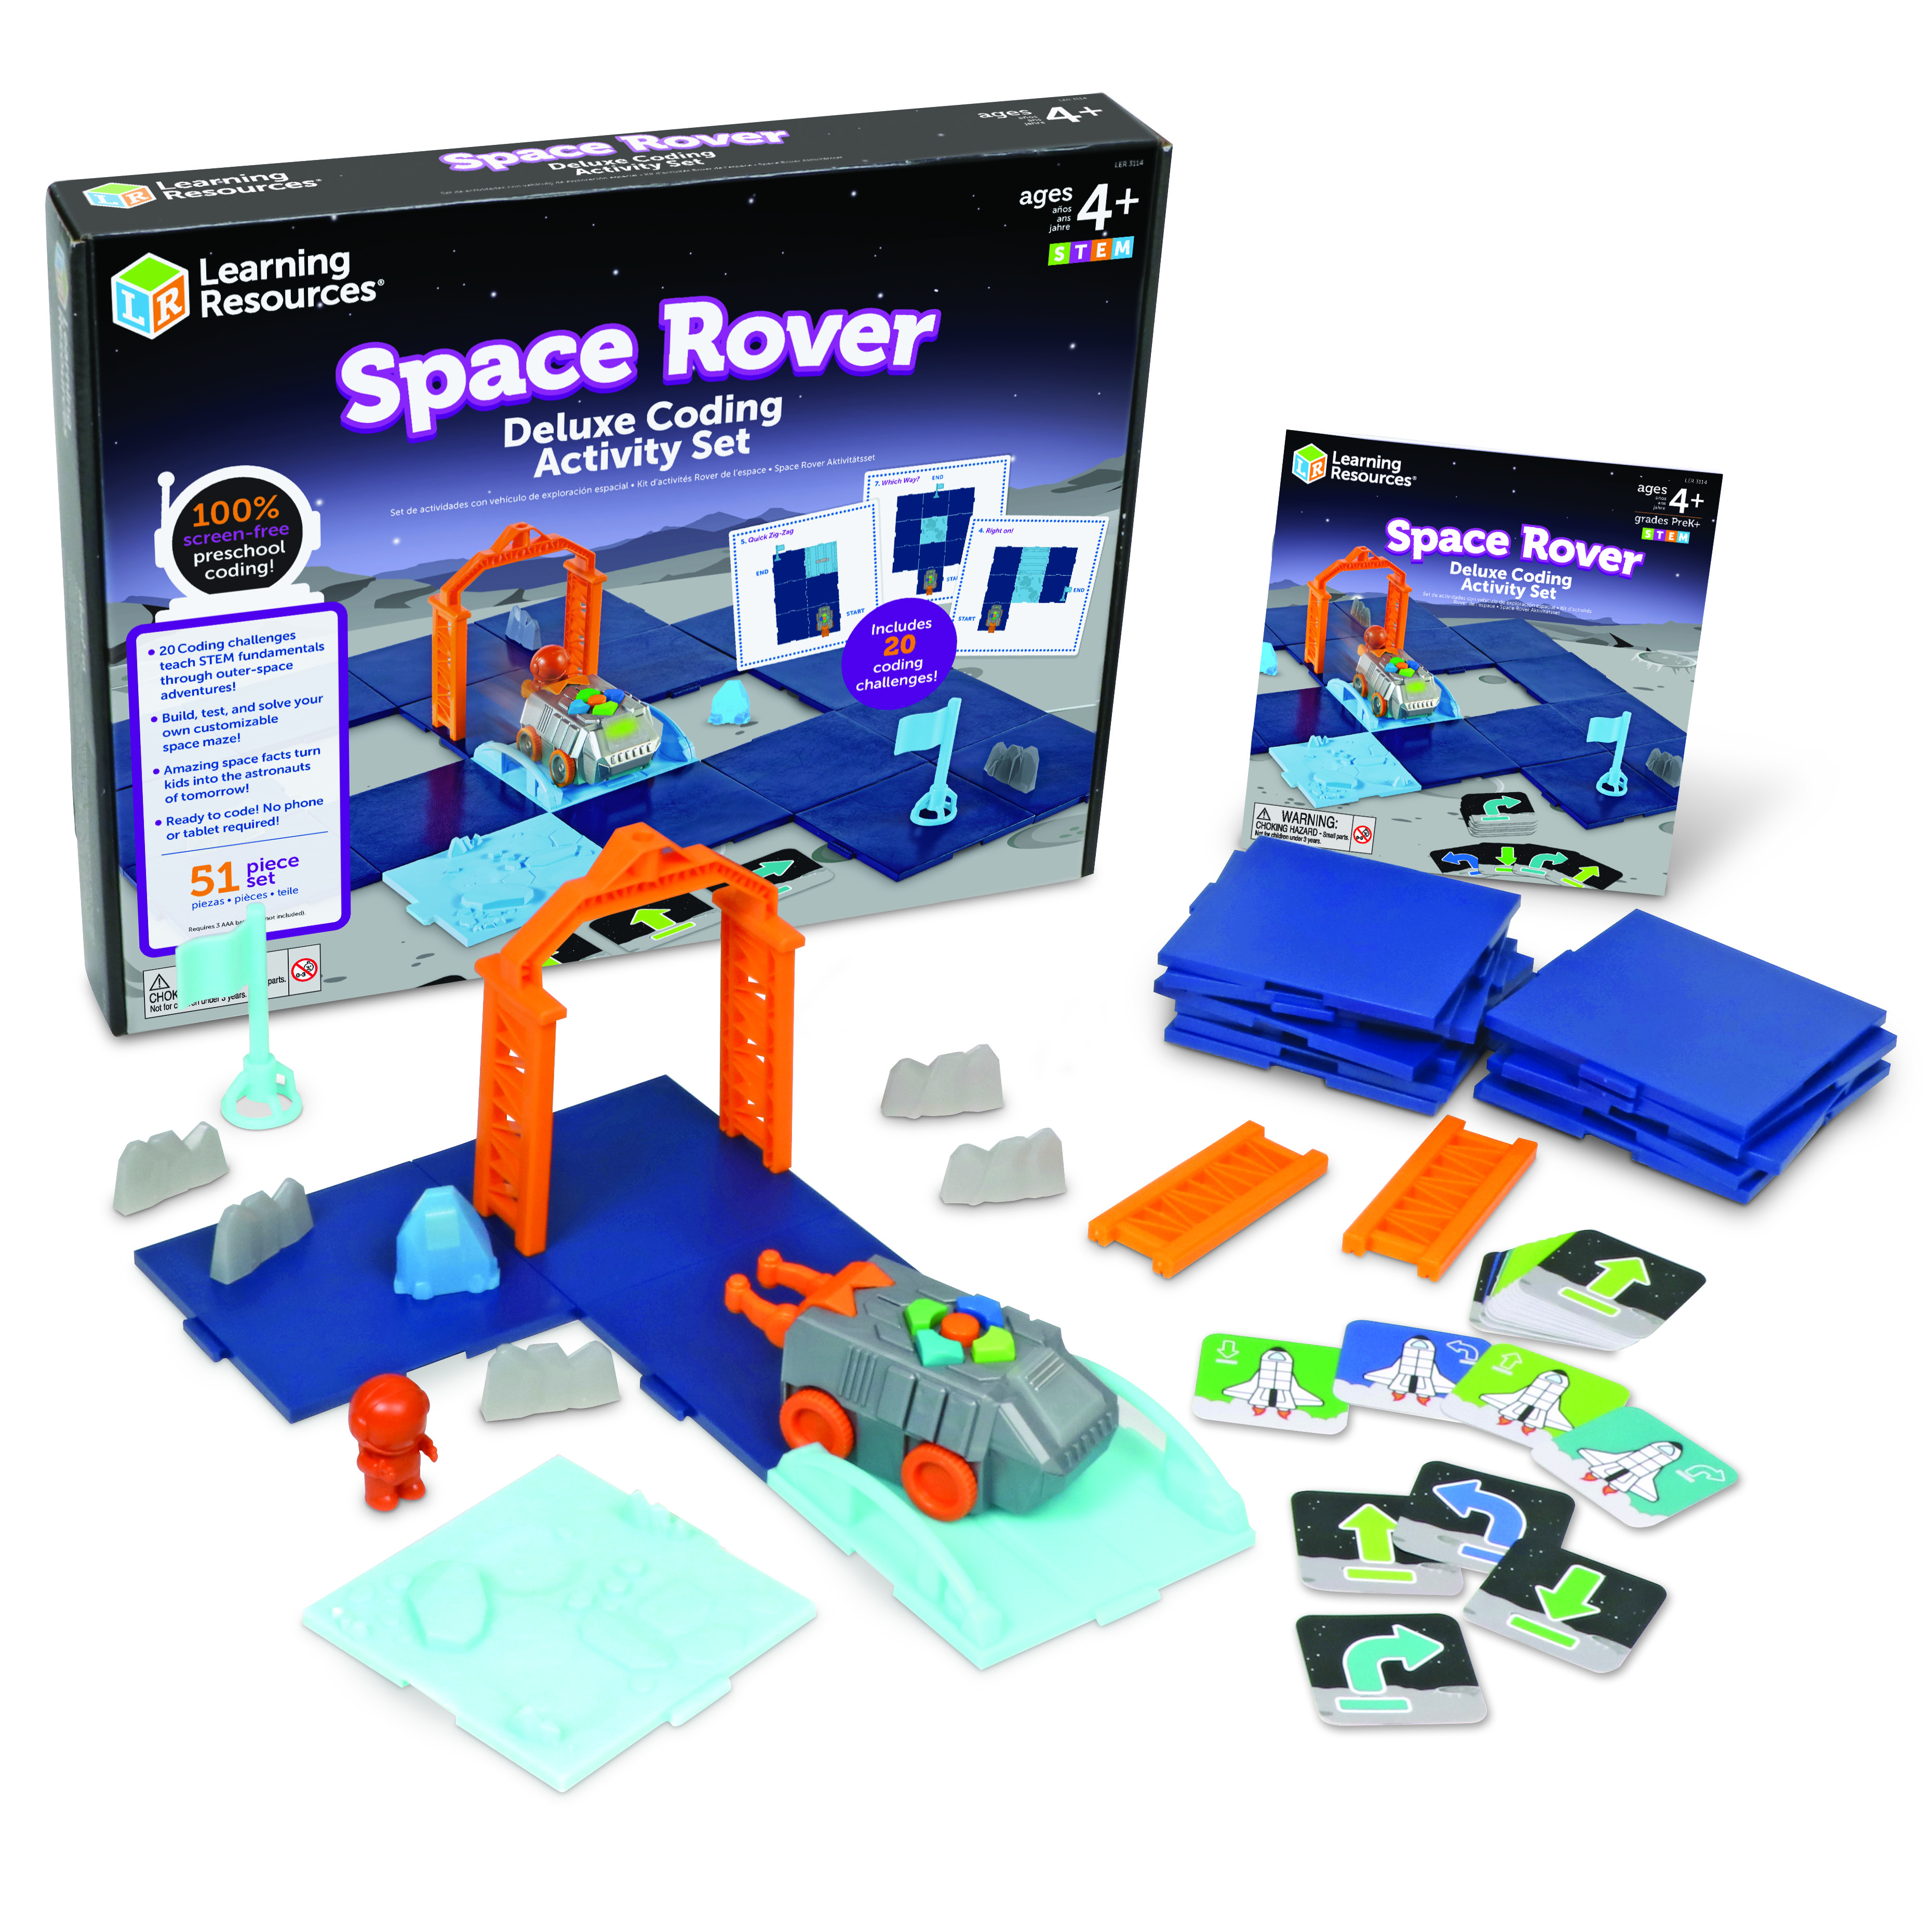  Blocks Rock! A STEM Toy and Educational Game for Competitive  Structured Block Play, Ages 4+ : Toys & Games